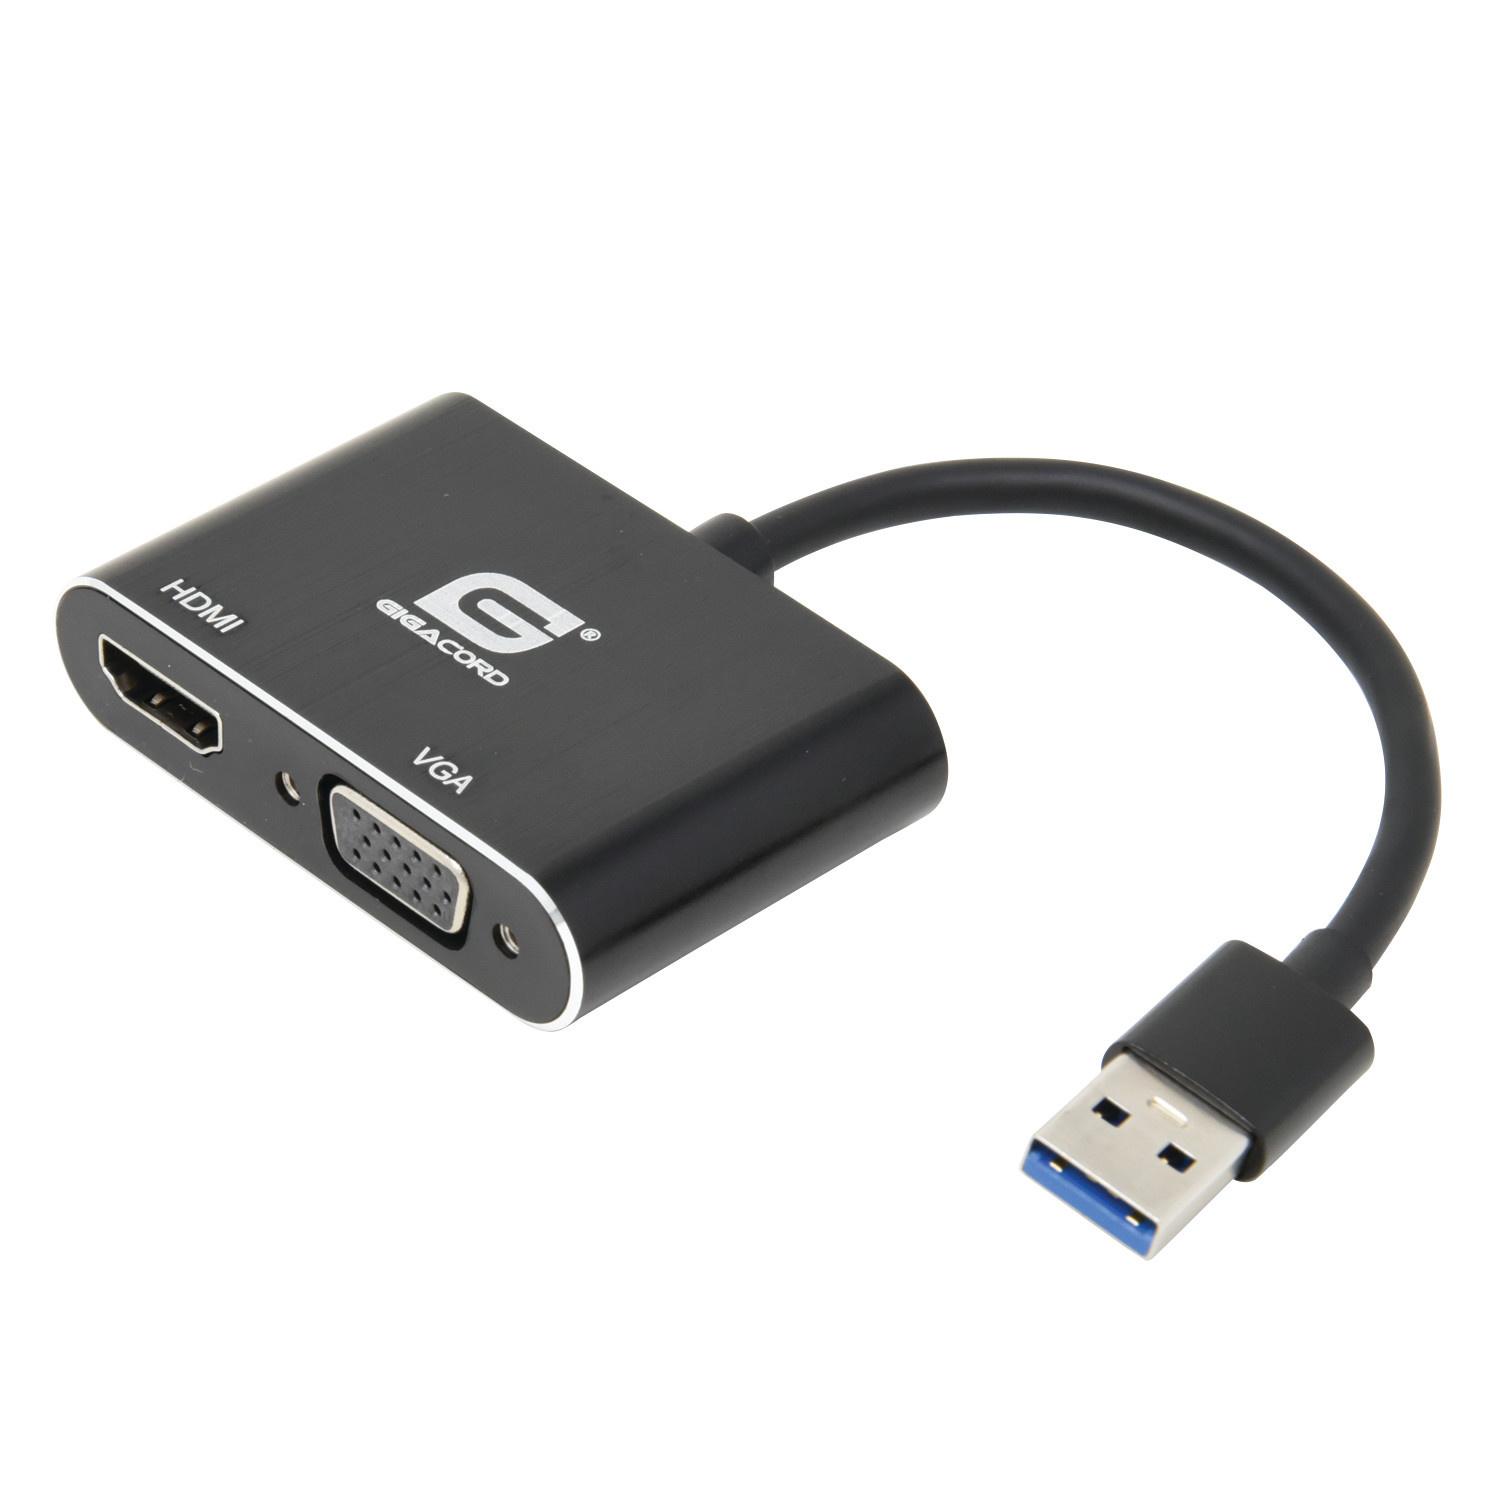 Cablecc Super Speed USB 3.0 to VGA Video Graphic Card Display External Cable Adapter for Windows 7 WIN8